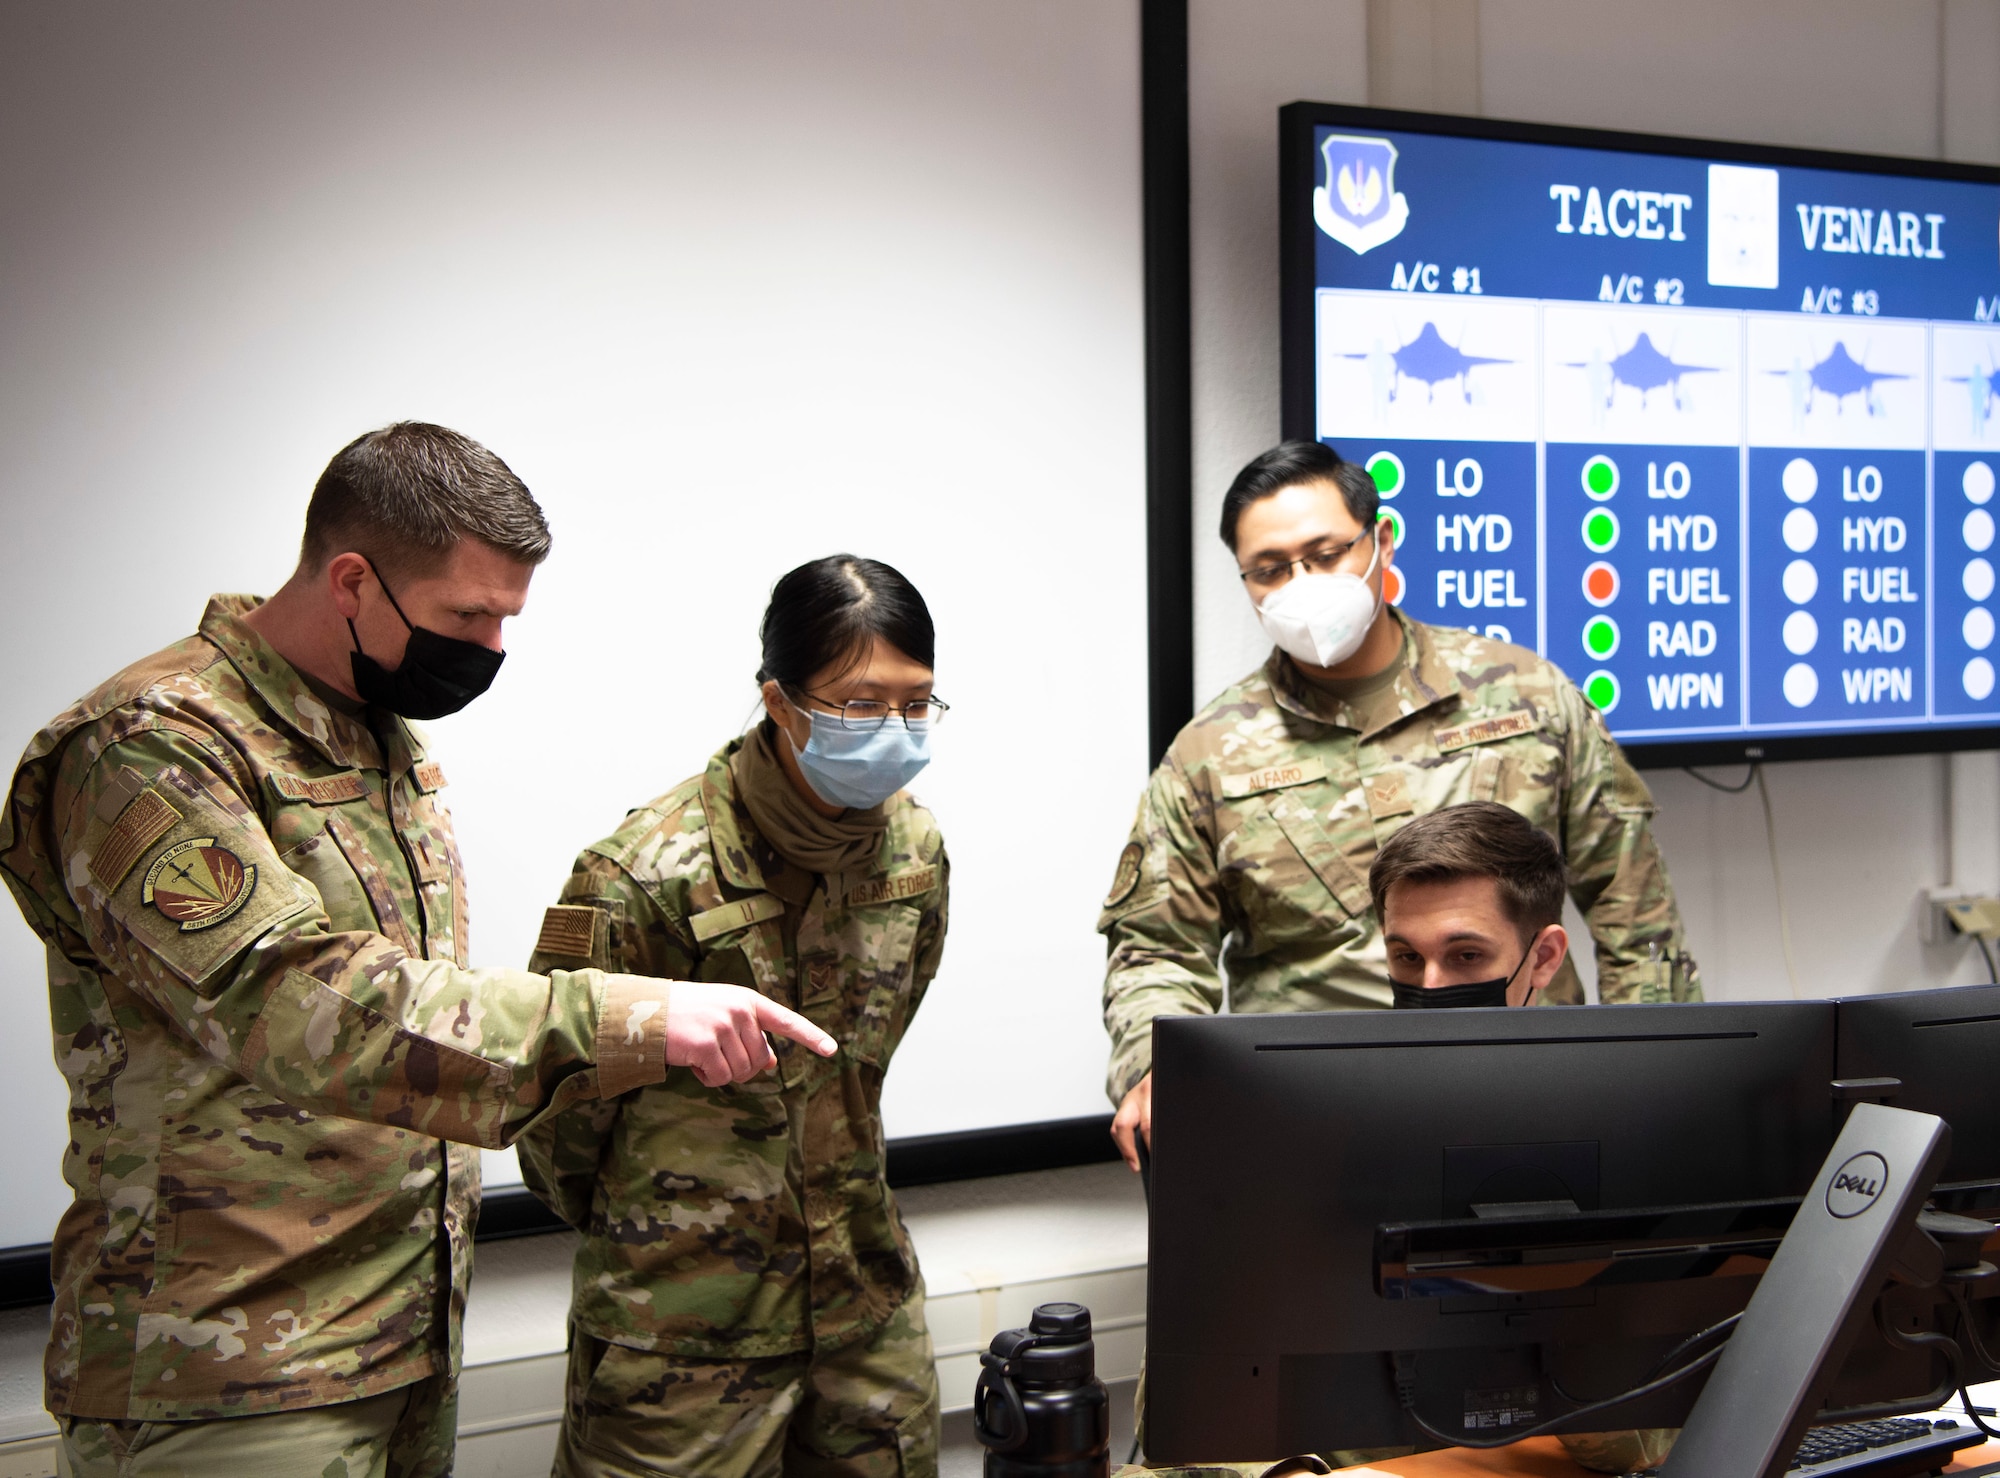 2nd Lt. Nicholas Gildenmeister, 86th Communication Squadron; Senior Airman Rose Li 86th CS; Senior Airman Dakota Lindberg, 52nd CS; and Senior Airman Marj Alfaro, 52nd CS, participate in the USAFE-led cyber exercise, Tacet Venari, at Ramstein Air Base, Germany, April 22, 2021. Tacet Venari is Latin for Silent Hunt, which describes the goal of the exercise: to hunt for adversaries within USAFE-AFAFRICA weapons systems. The exercise is one of several DoD-wide efforts to provide mission assurance and enhance command and control by providing warfighters the skills needed to deliver defensive cyber operations. (U.S. Air Force photo by 1st Lt. Hannah Durbin)